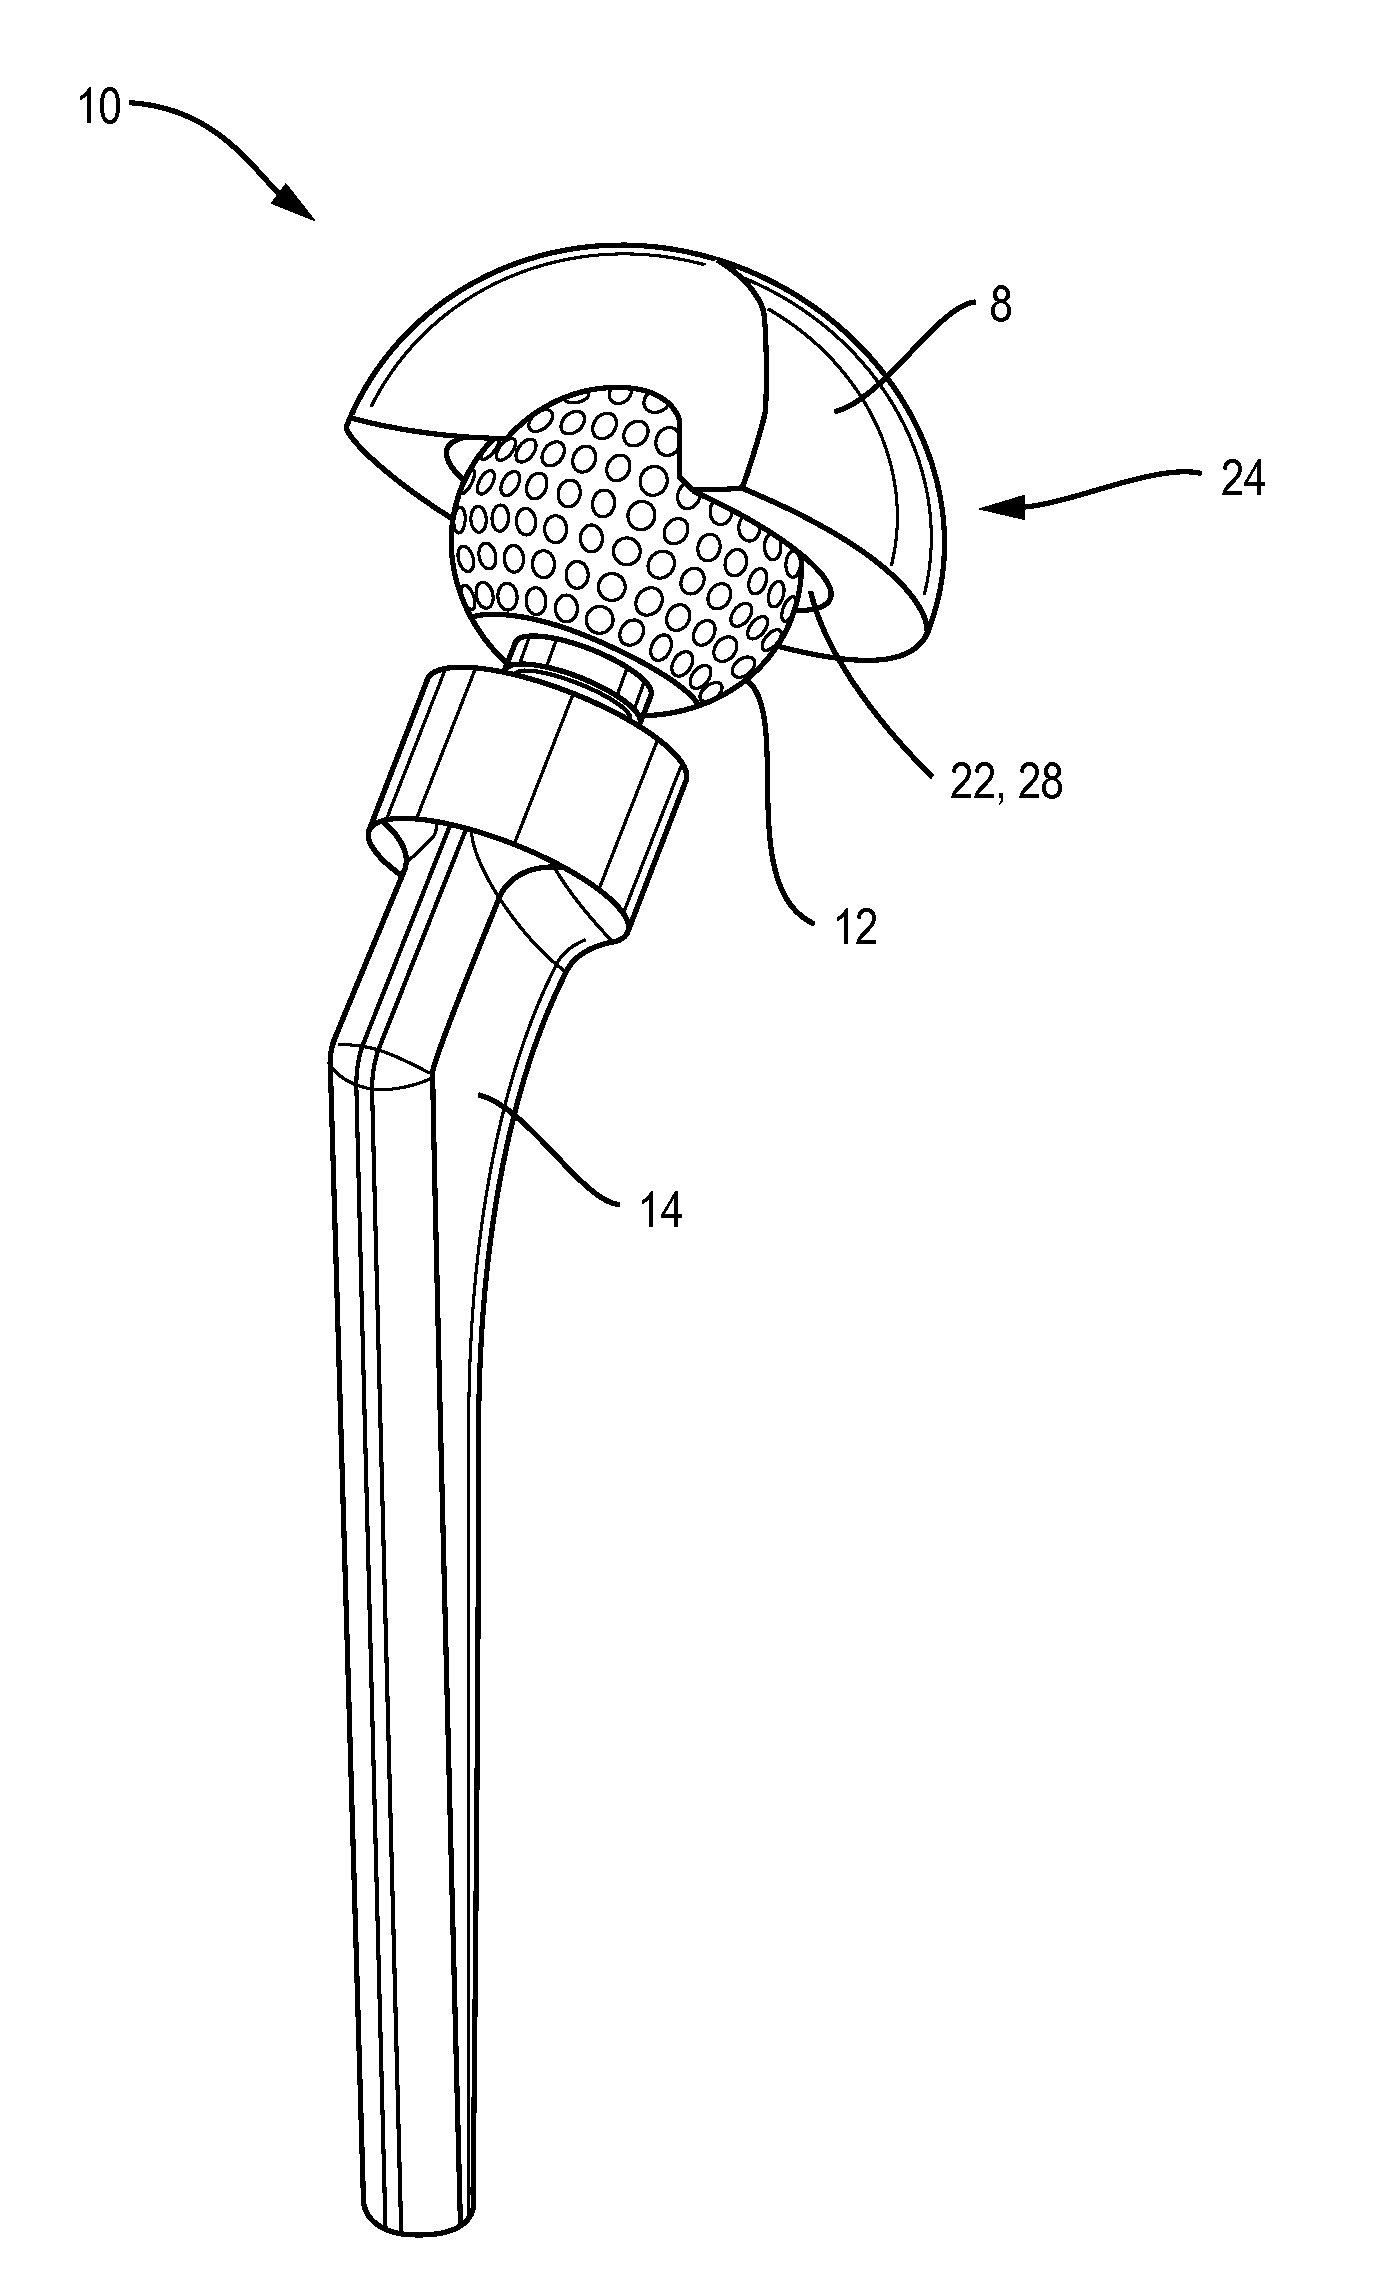 Extended life prosthetic hip joint